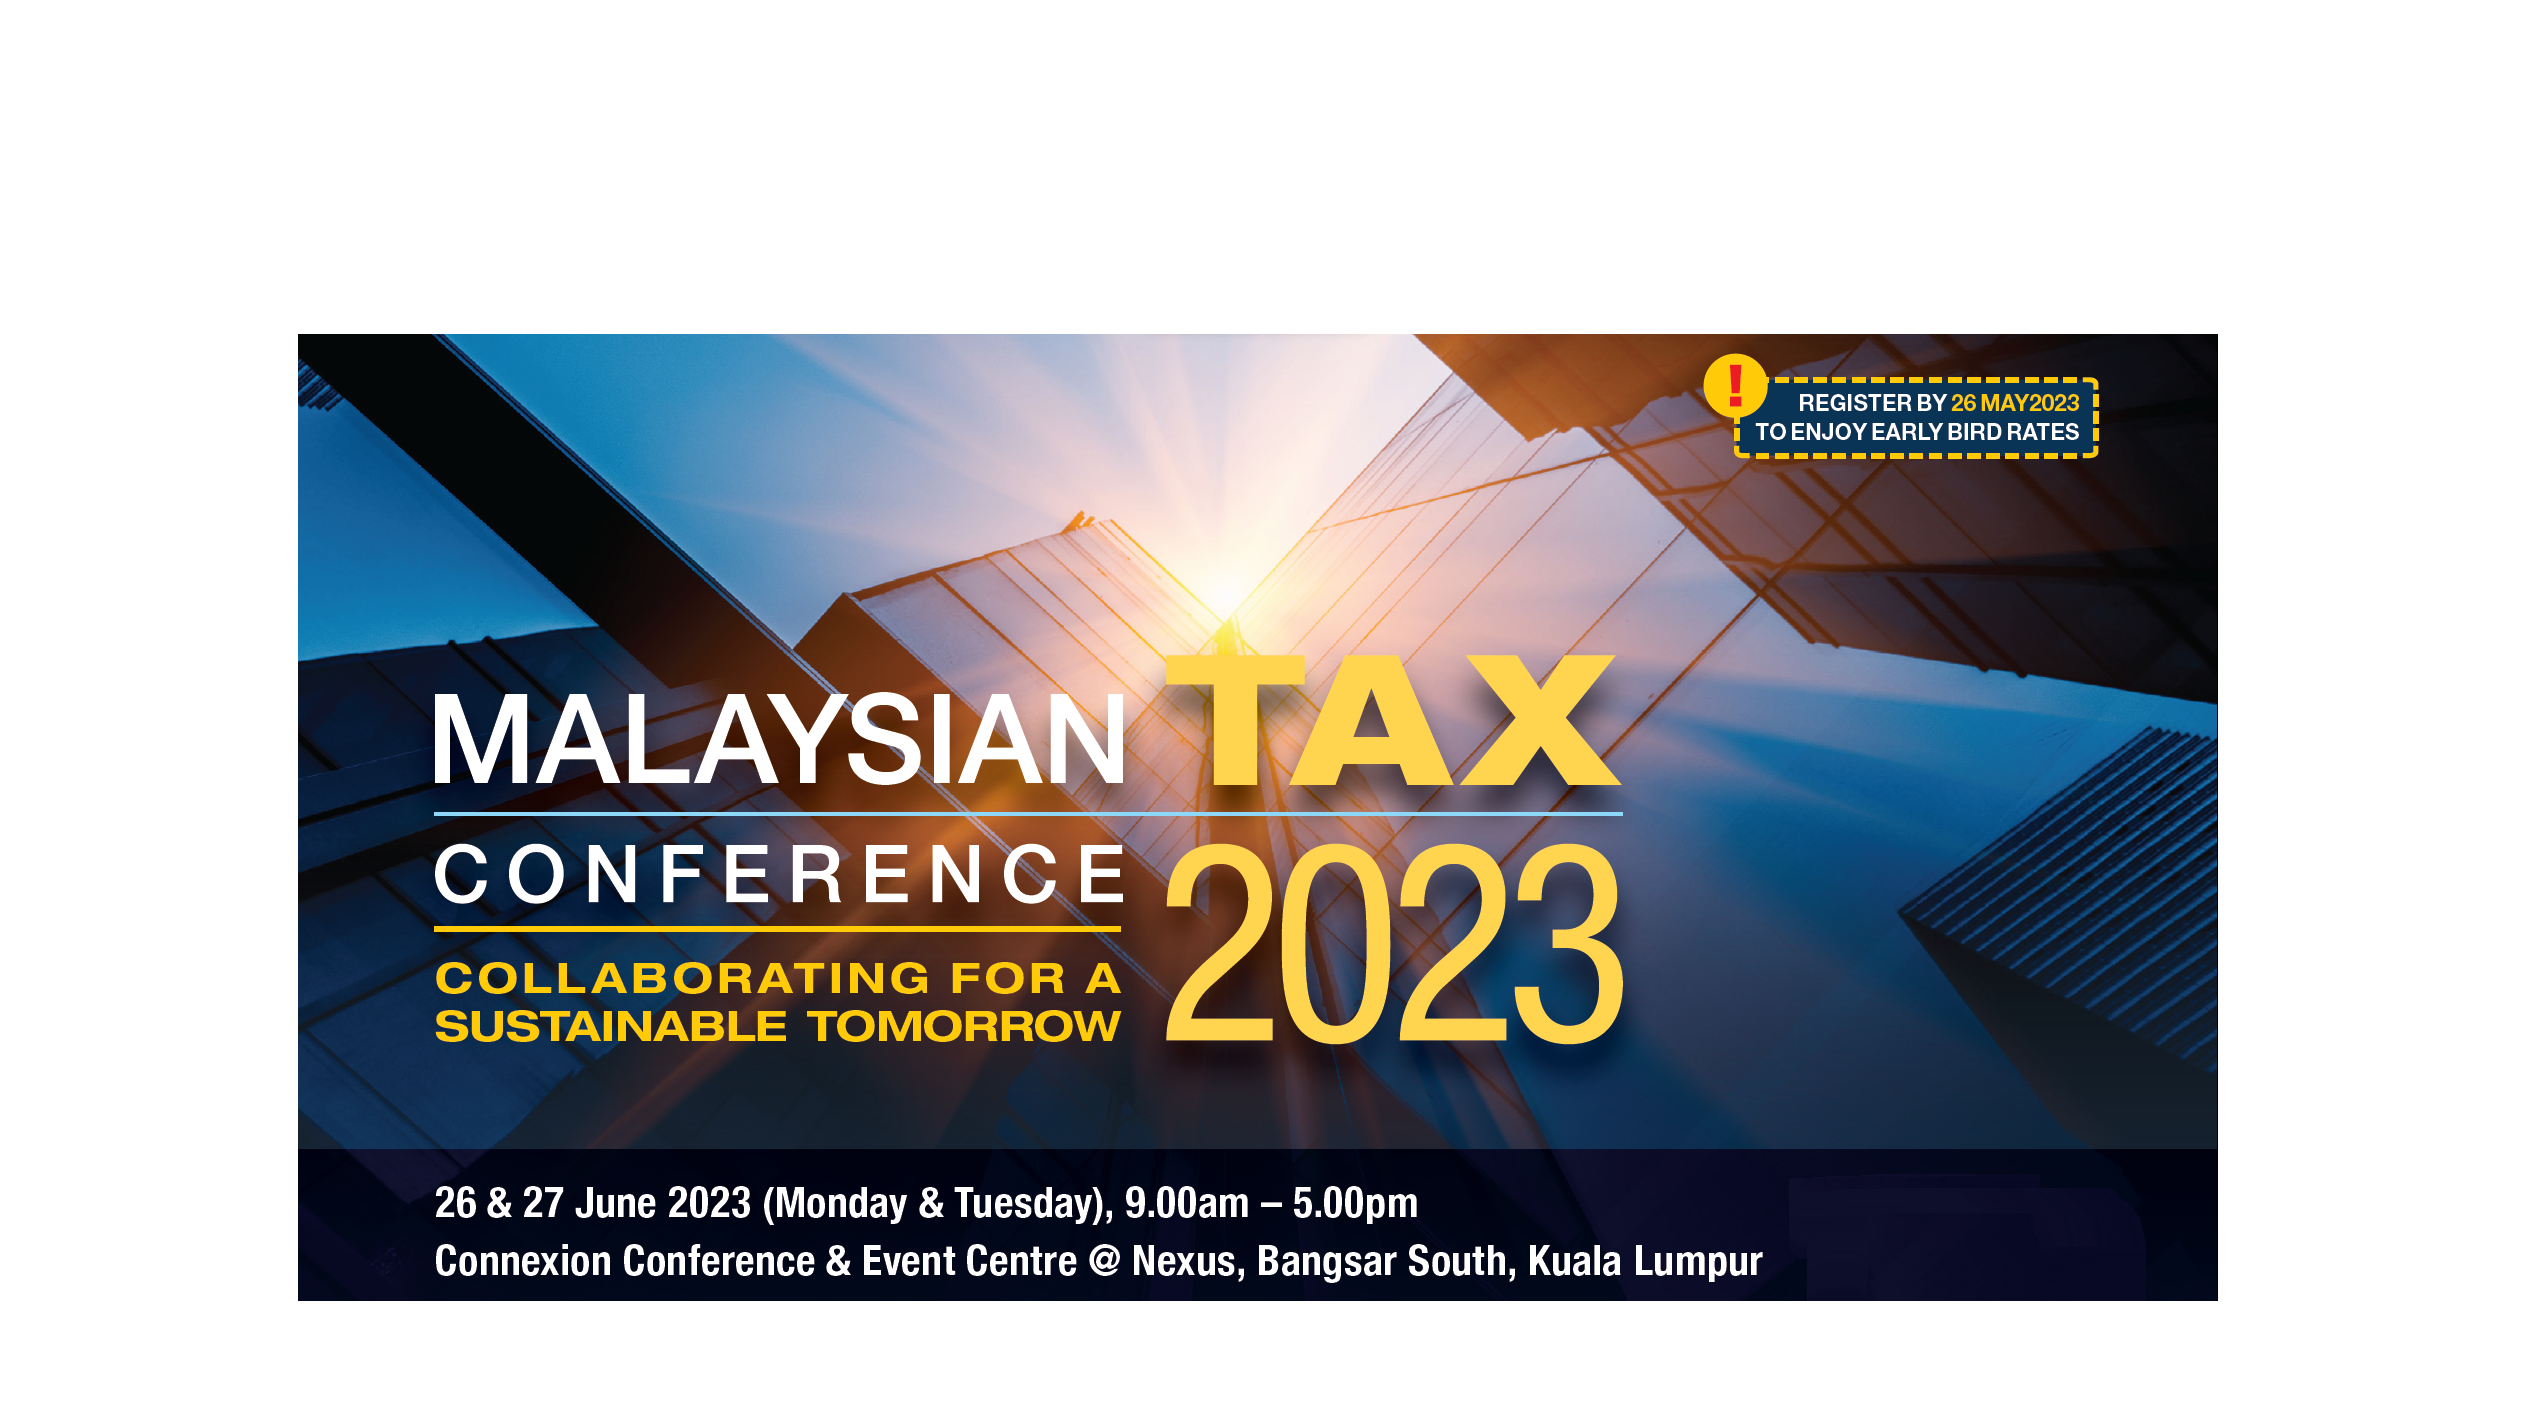 malaysian-tax-conference-2023-m-a-t-a